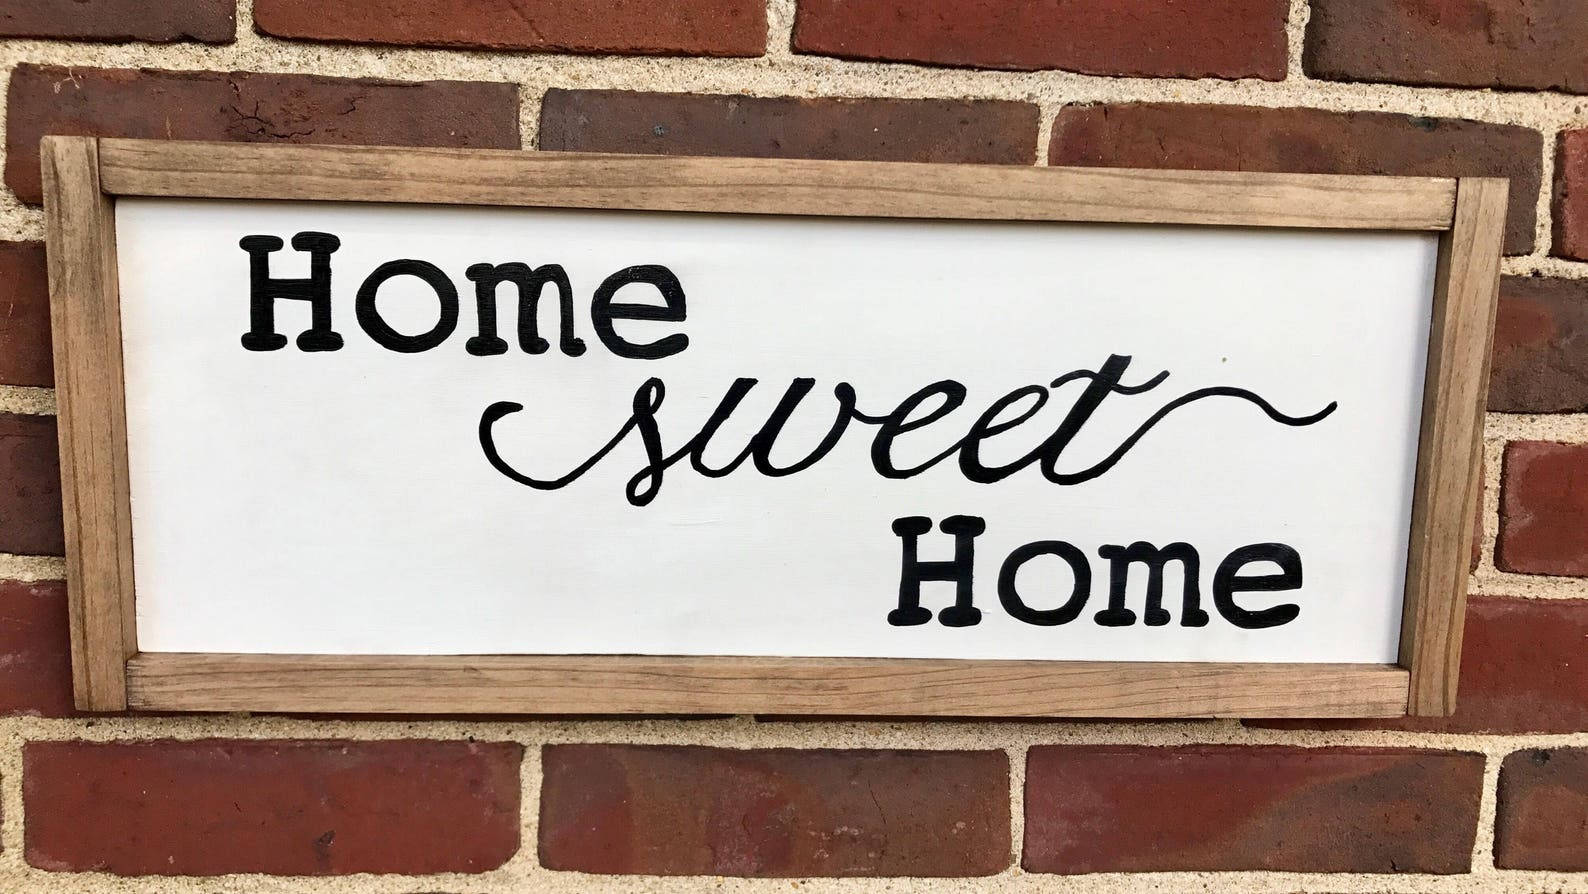 Home Sweet Home Greeting Board Background